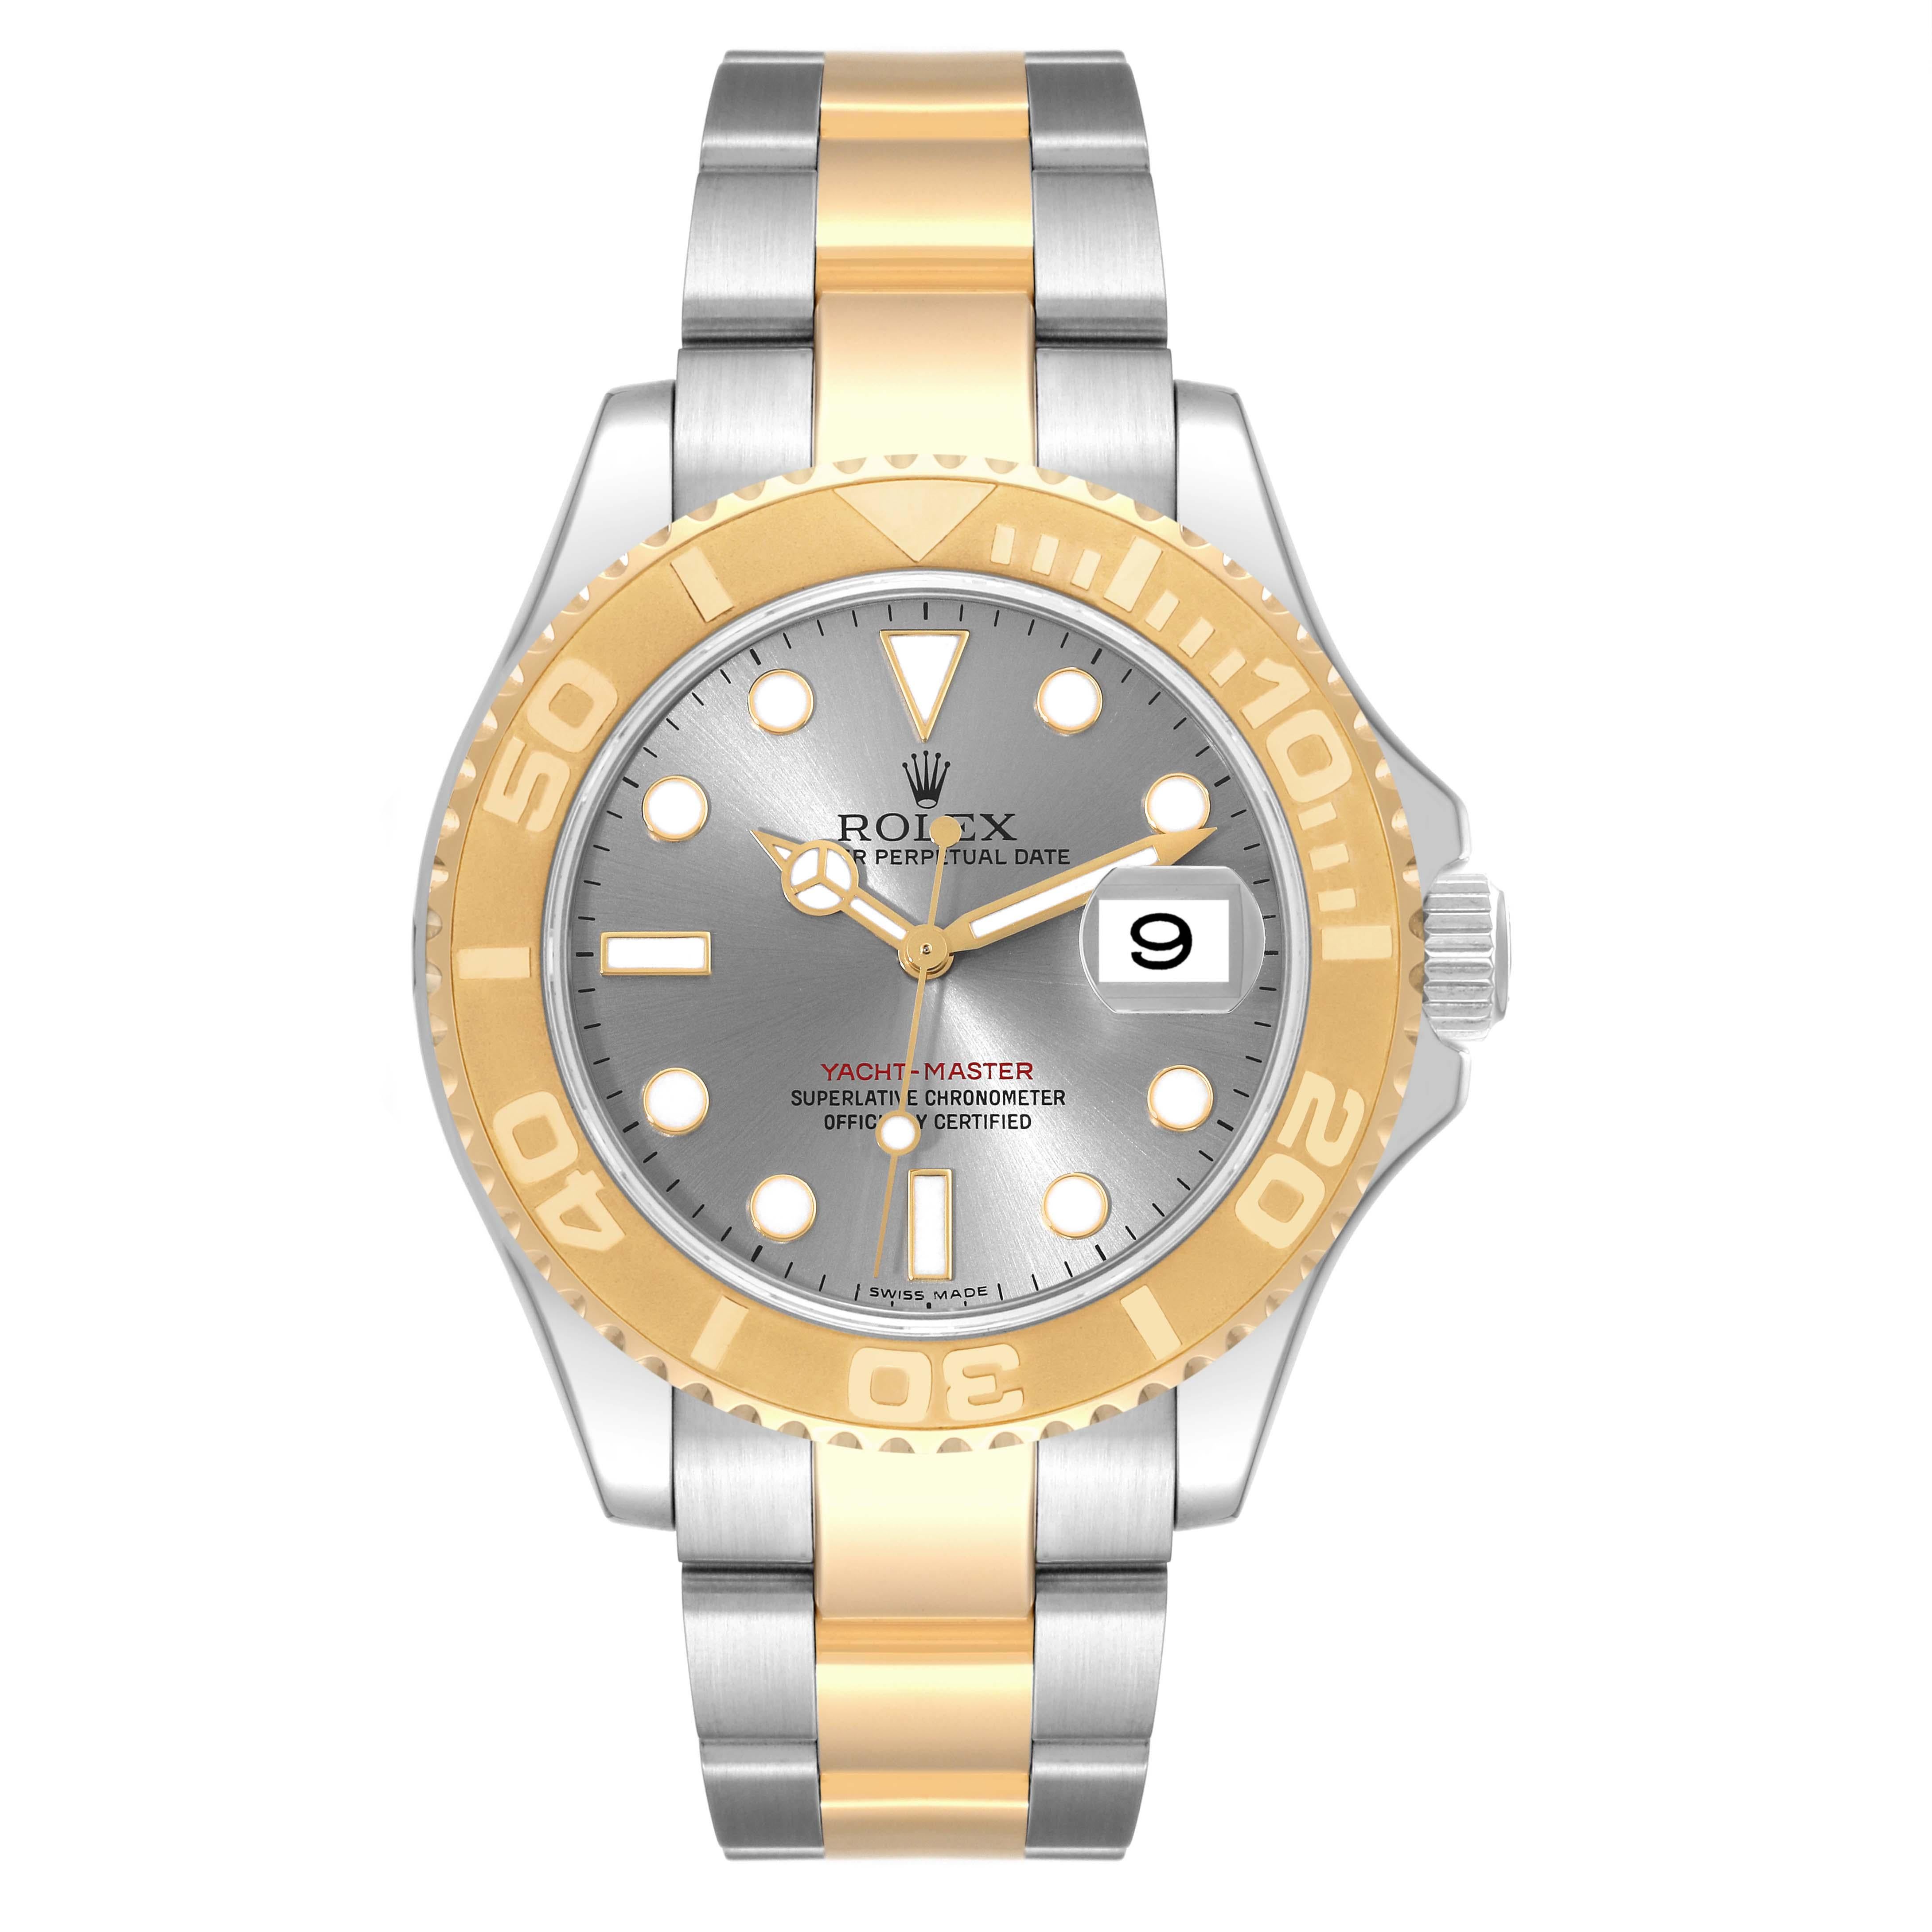 Rolex Yachtmaster Steel Yellow Gold Slate Dial Mens Watch 16623 Box Card. Officially certified chronometer automatic self-winding movement. Stainless steel case 40.0 mm in diameter. Rolex logo on a crown. 18k yellow gold special time-lapse